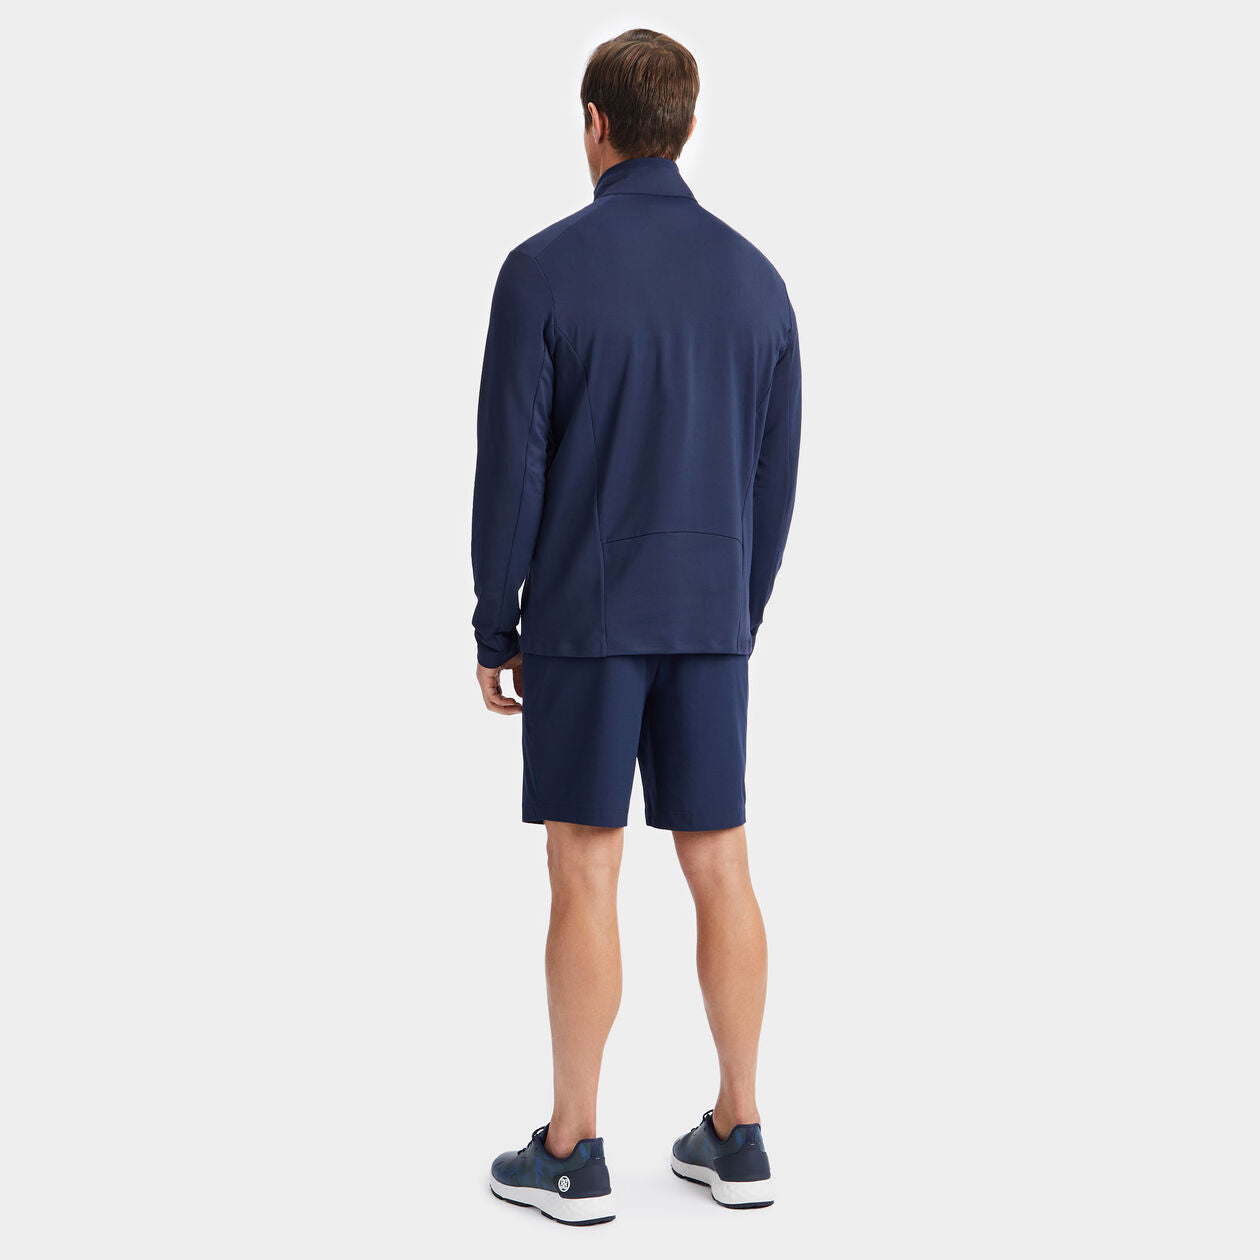 G/Fore Brushed Back Tech 1/4 Zip